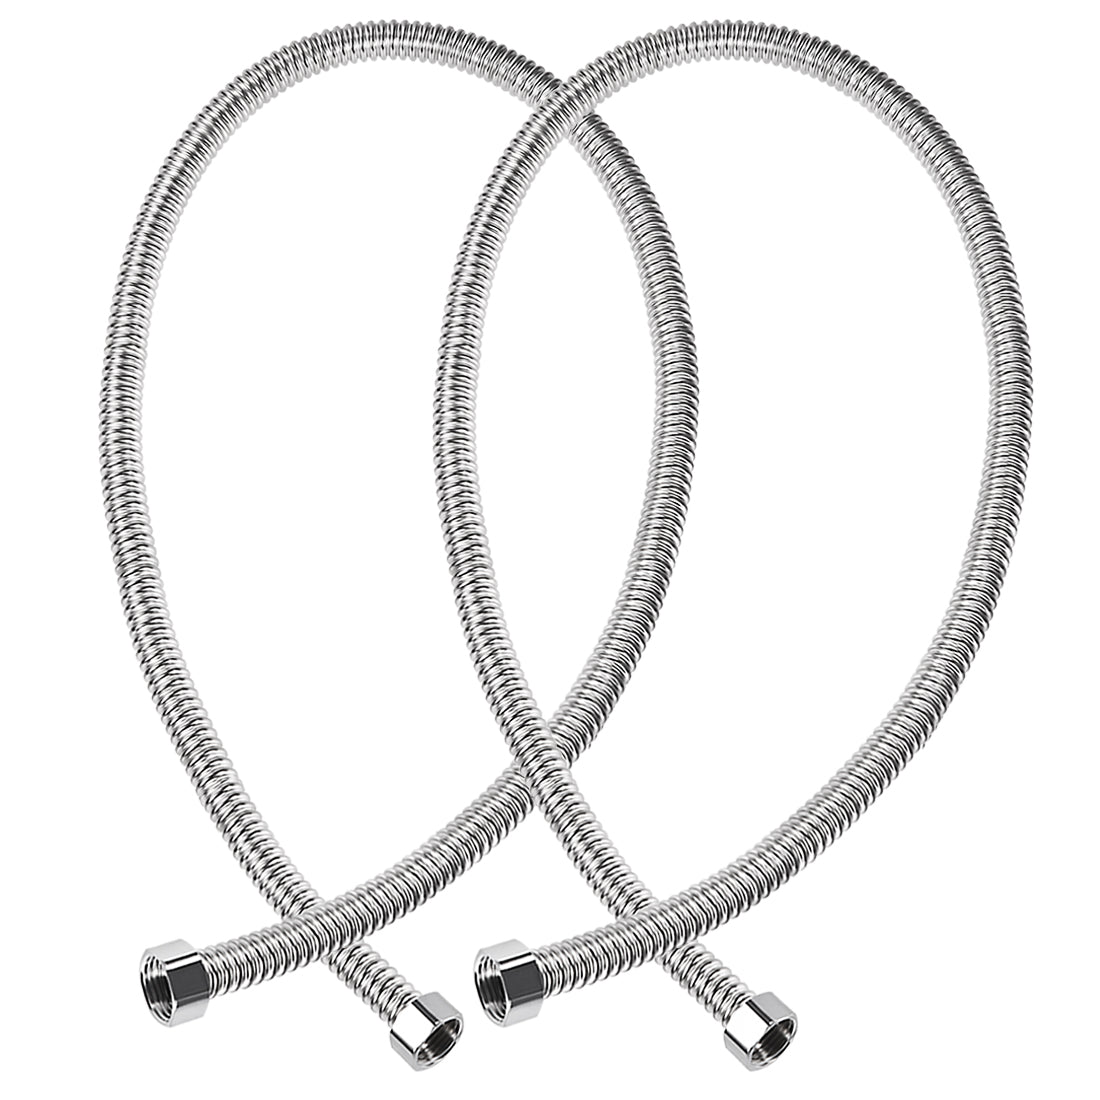 uxcell Uxcell Corrugated Stainless Steel Flexible Water Line 47.2inch Long G1/2 Female Threaded Connector with Washer , 2pcs